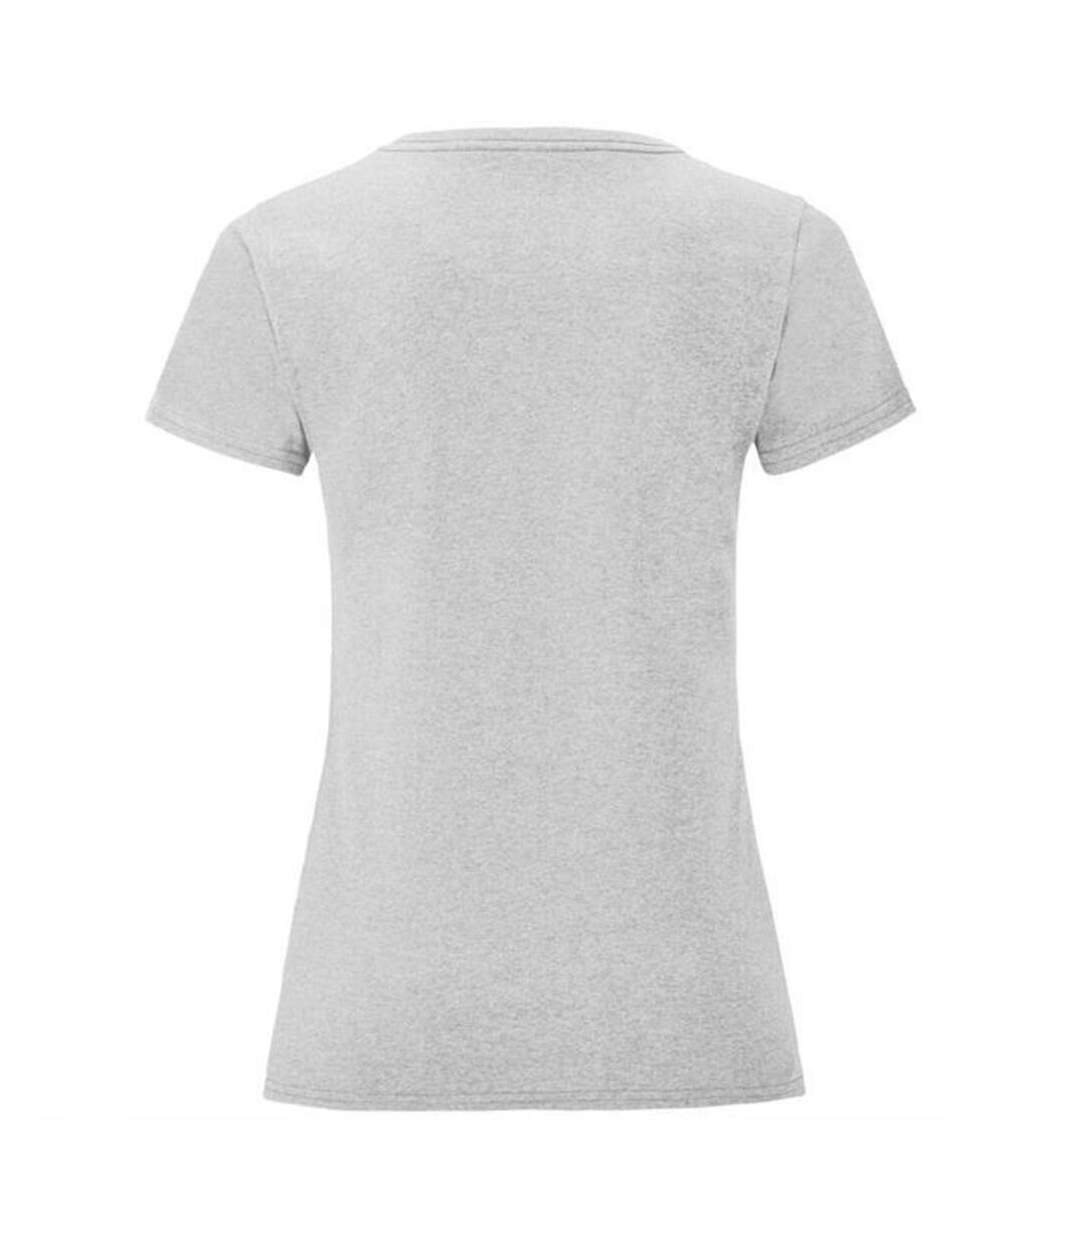 Fruit of the Loom - T-shirt ICONIC - Femme (Gris clair chiné) - UTBC5001